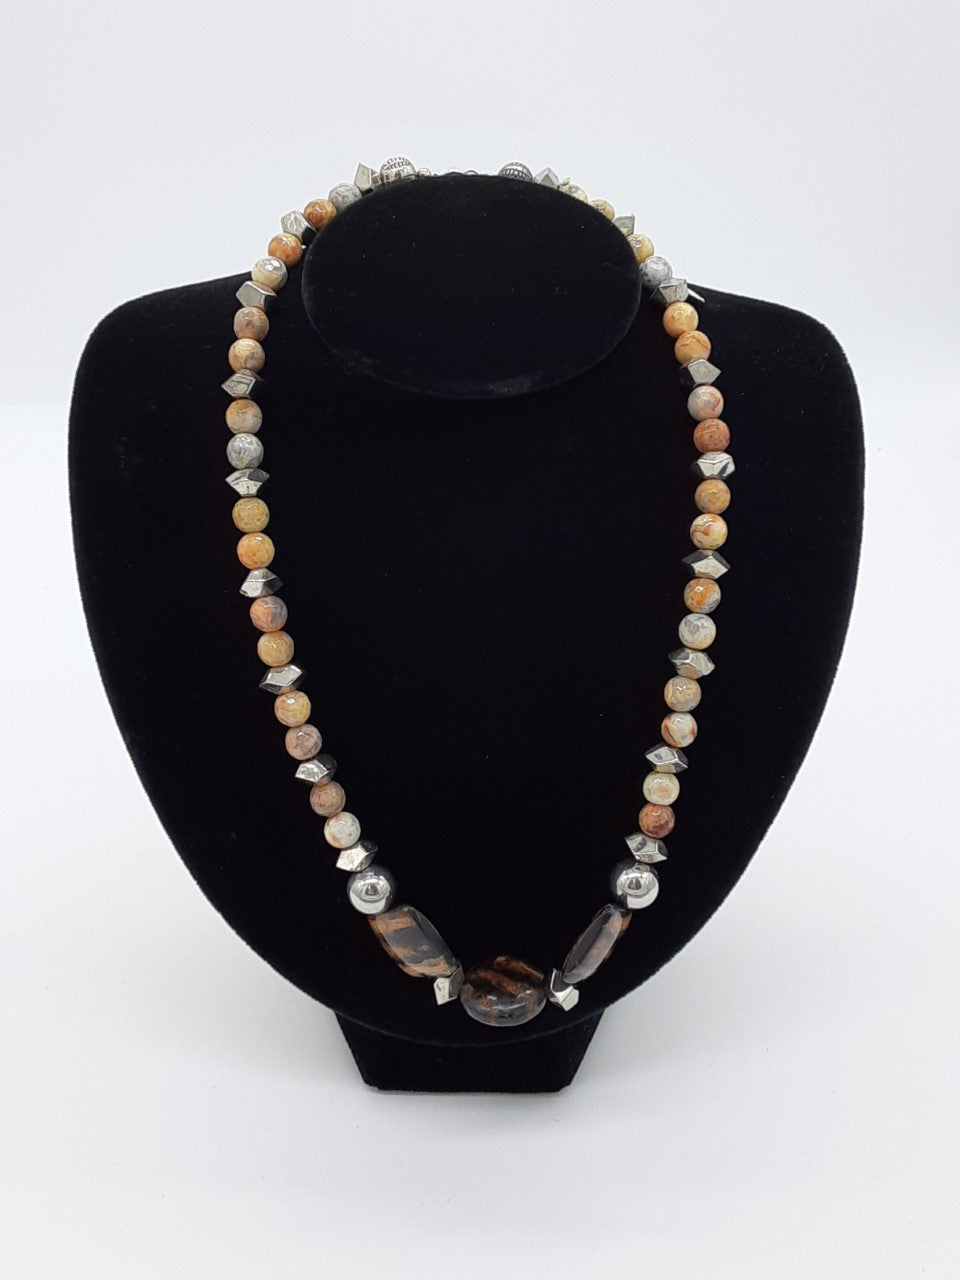 Necklace of beiges , with three tiger striped beads in the center- alternating silver